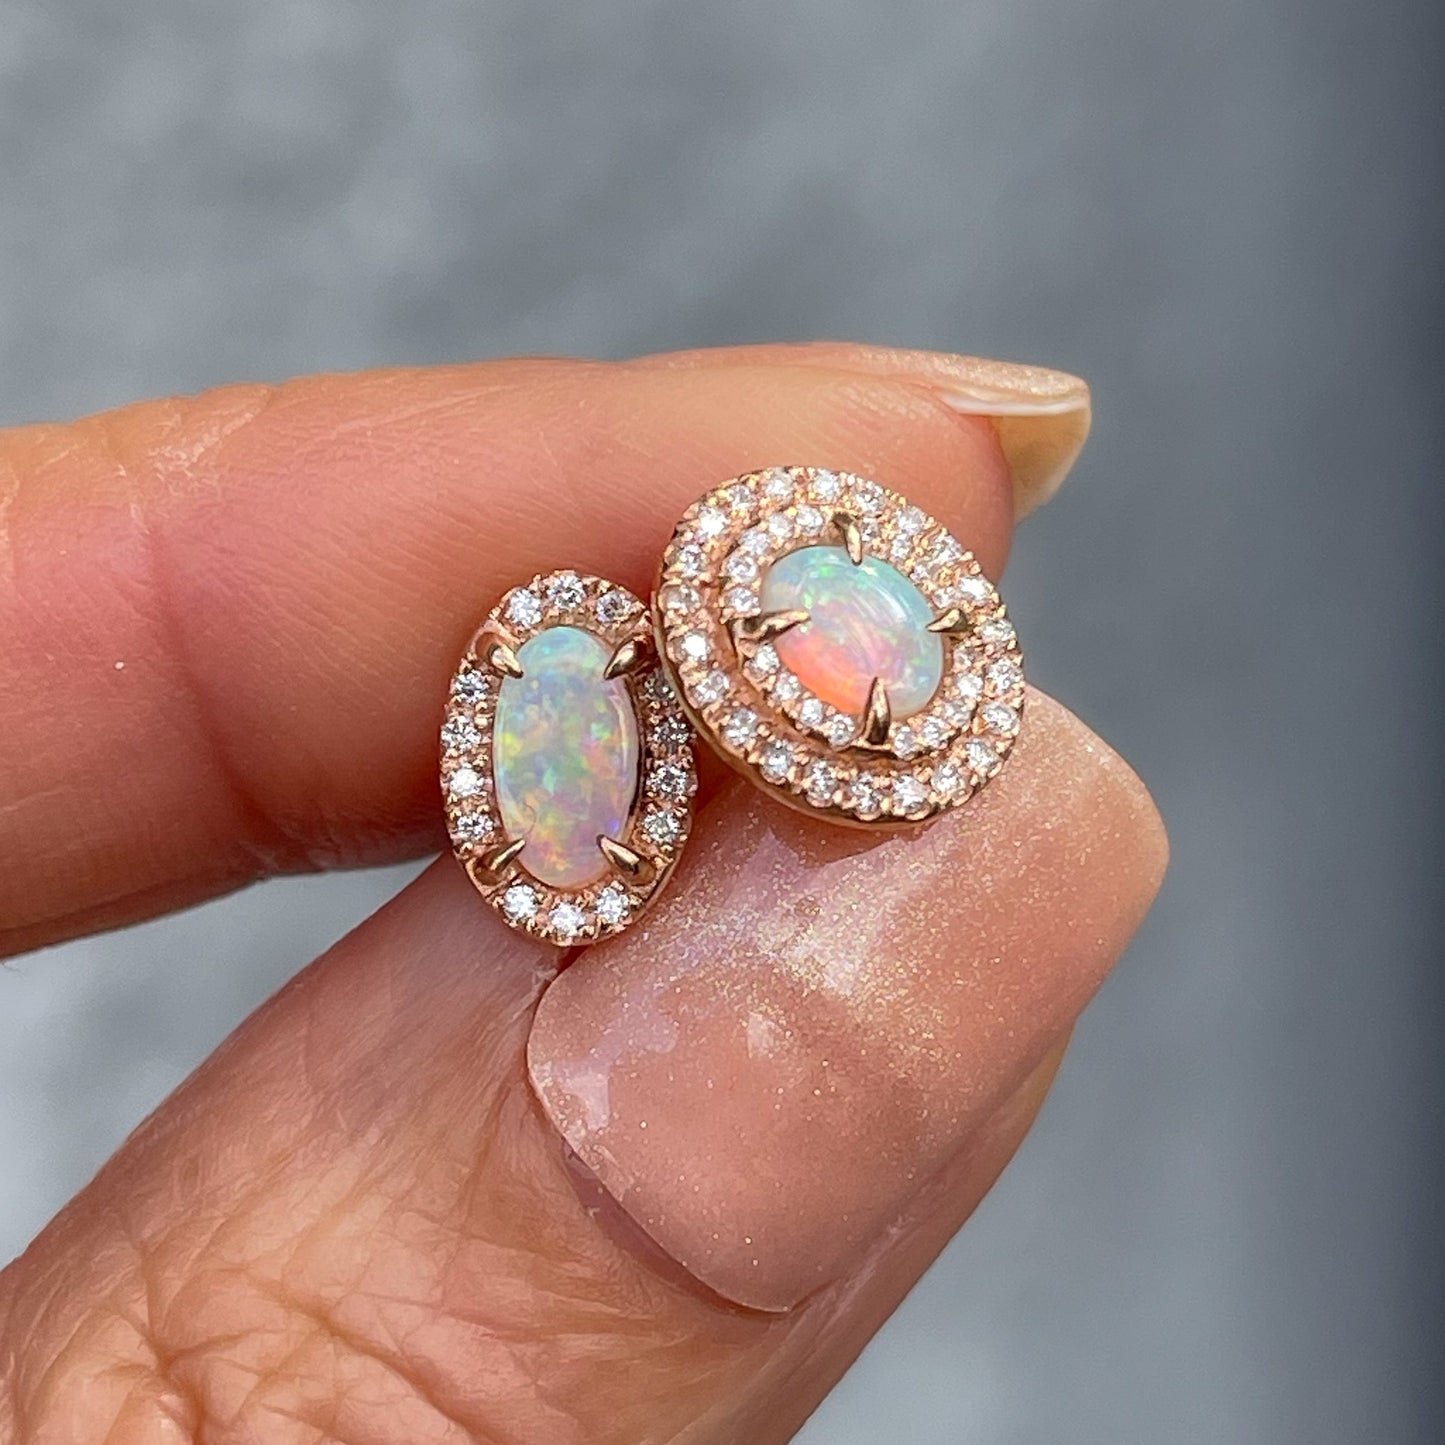 A pair of Australian Opal Earrings by NIXIN Jewelry in 14k rose gold with prong setting.